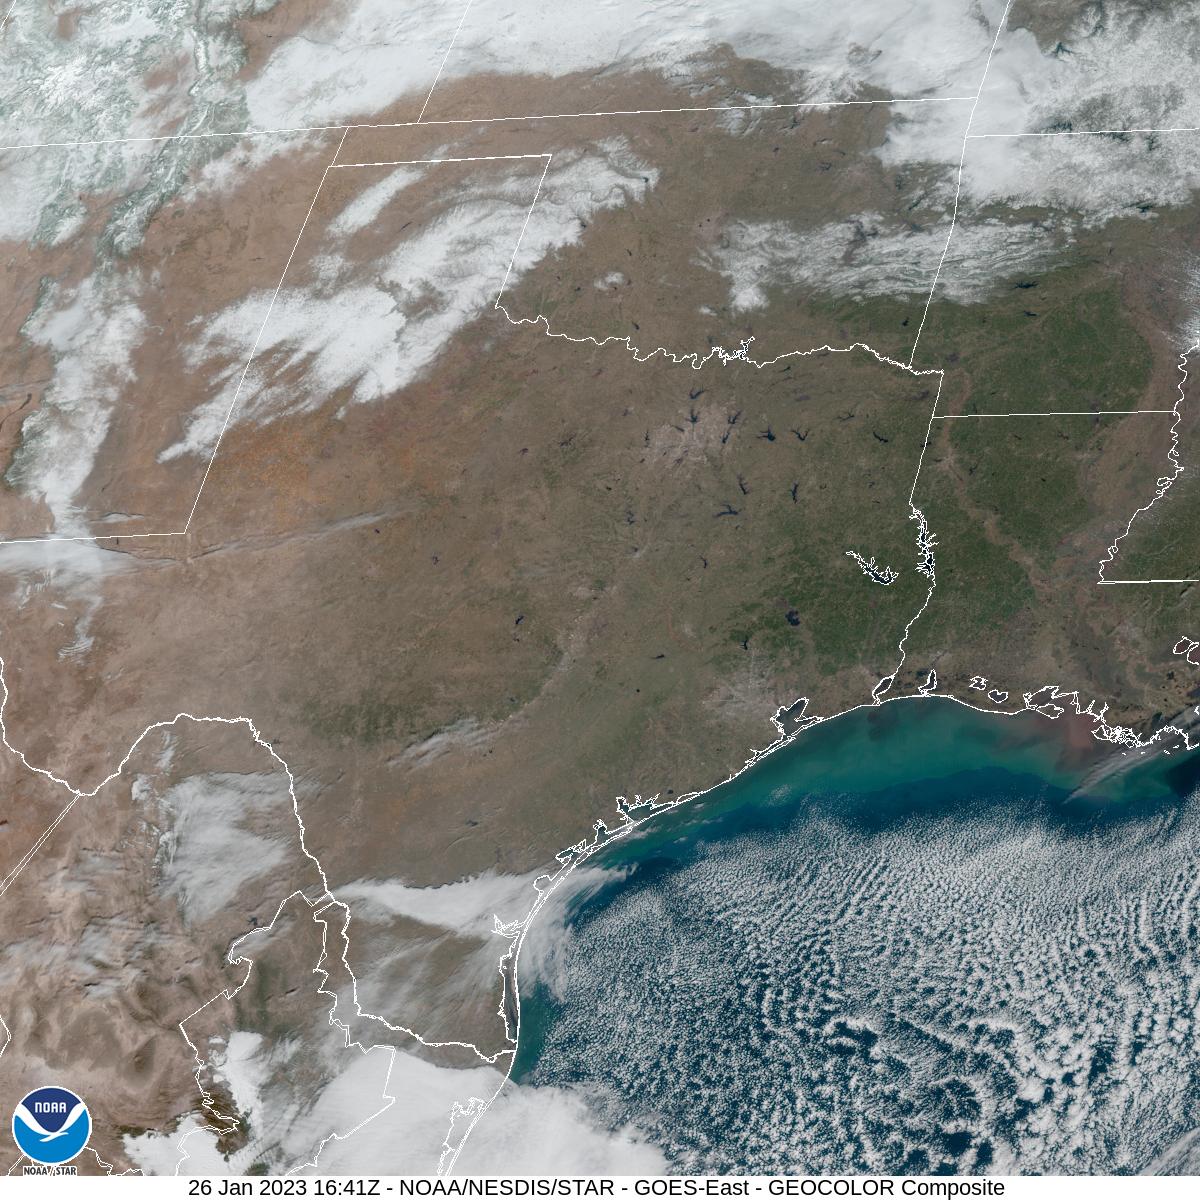 Geocolor Visible Satellite Image of the Southern U.S. Plains Region  at 10:41 am CST on January 26, 2023